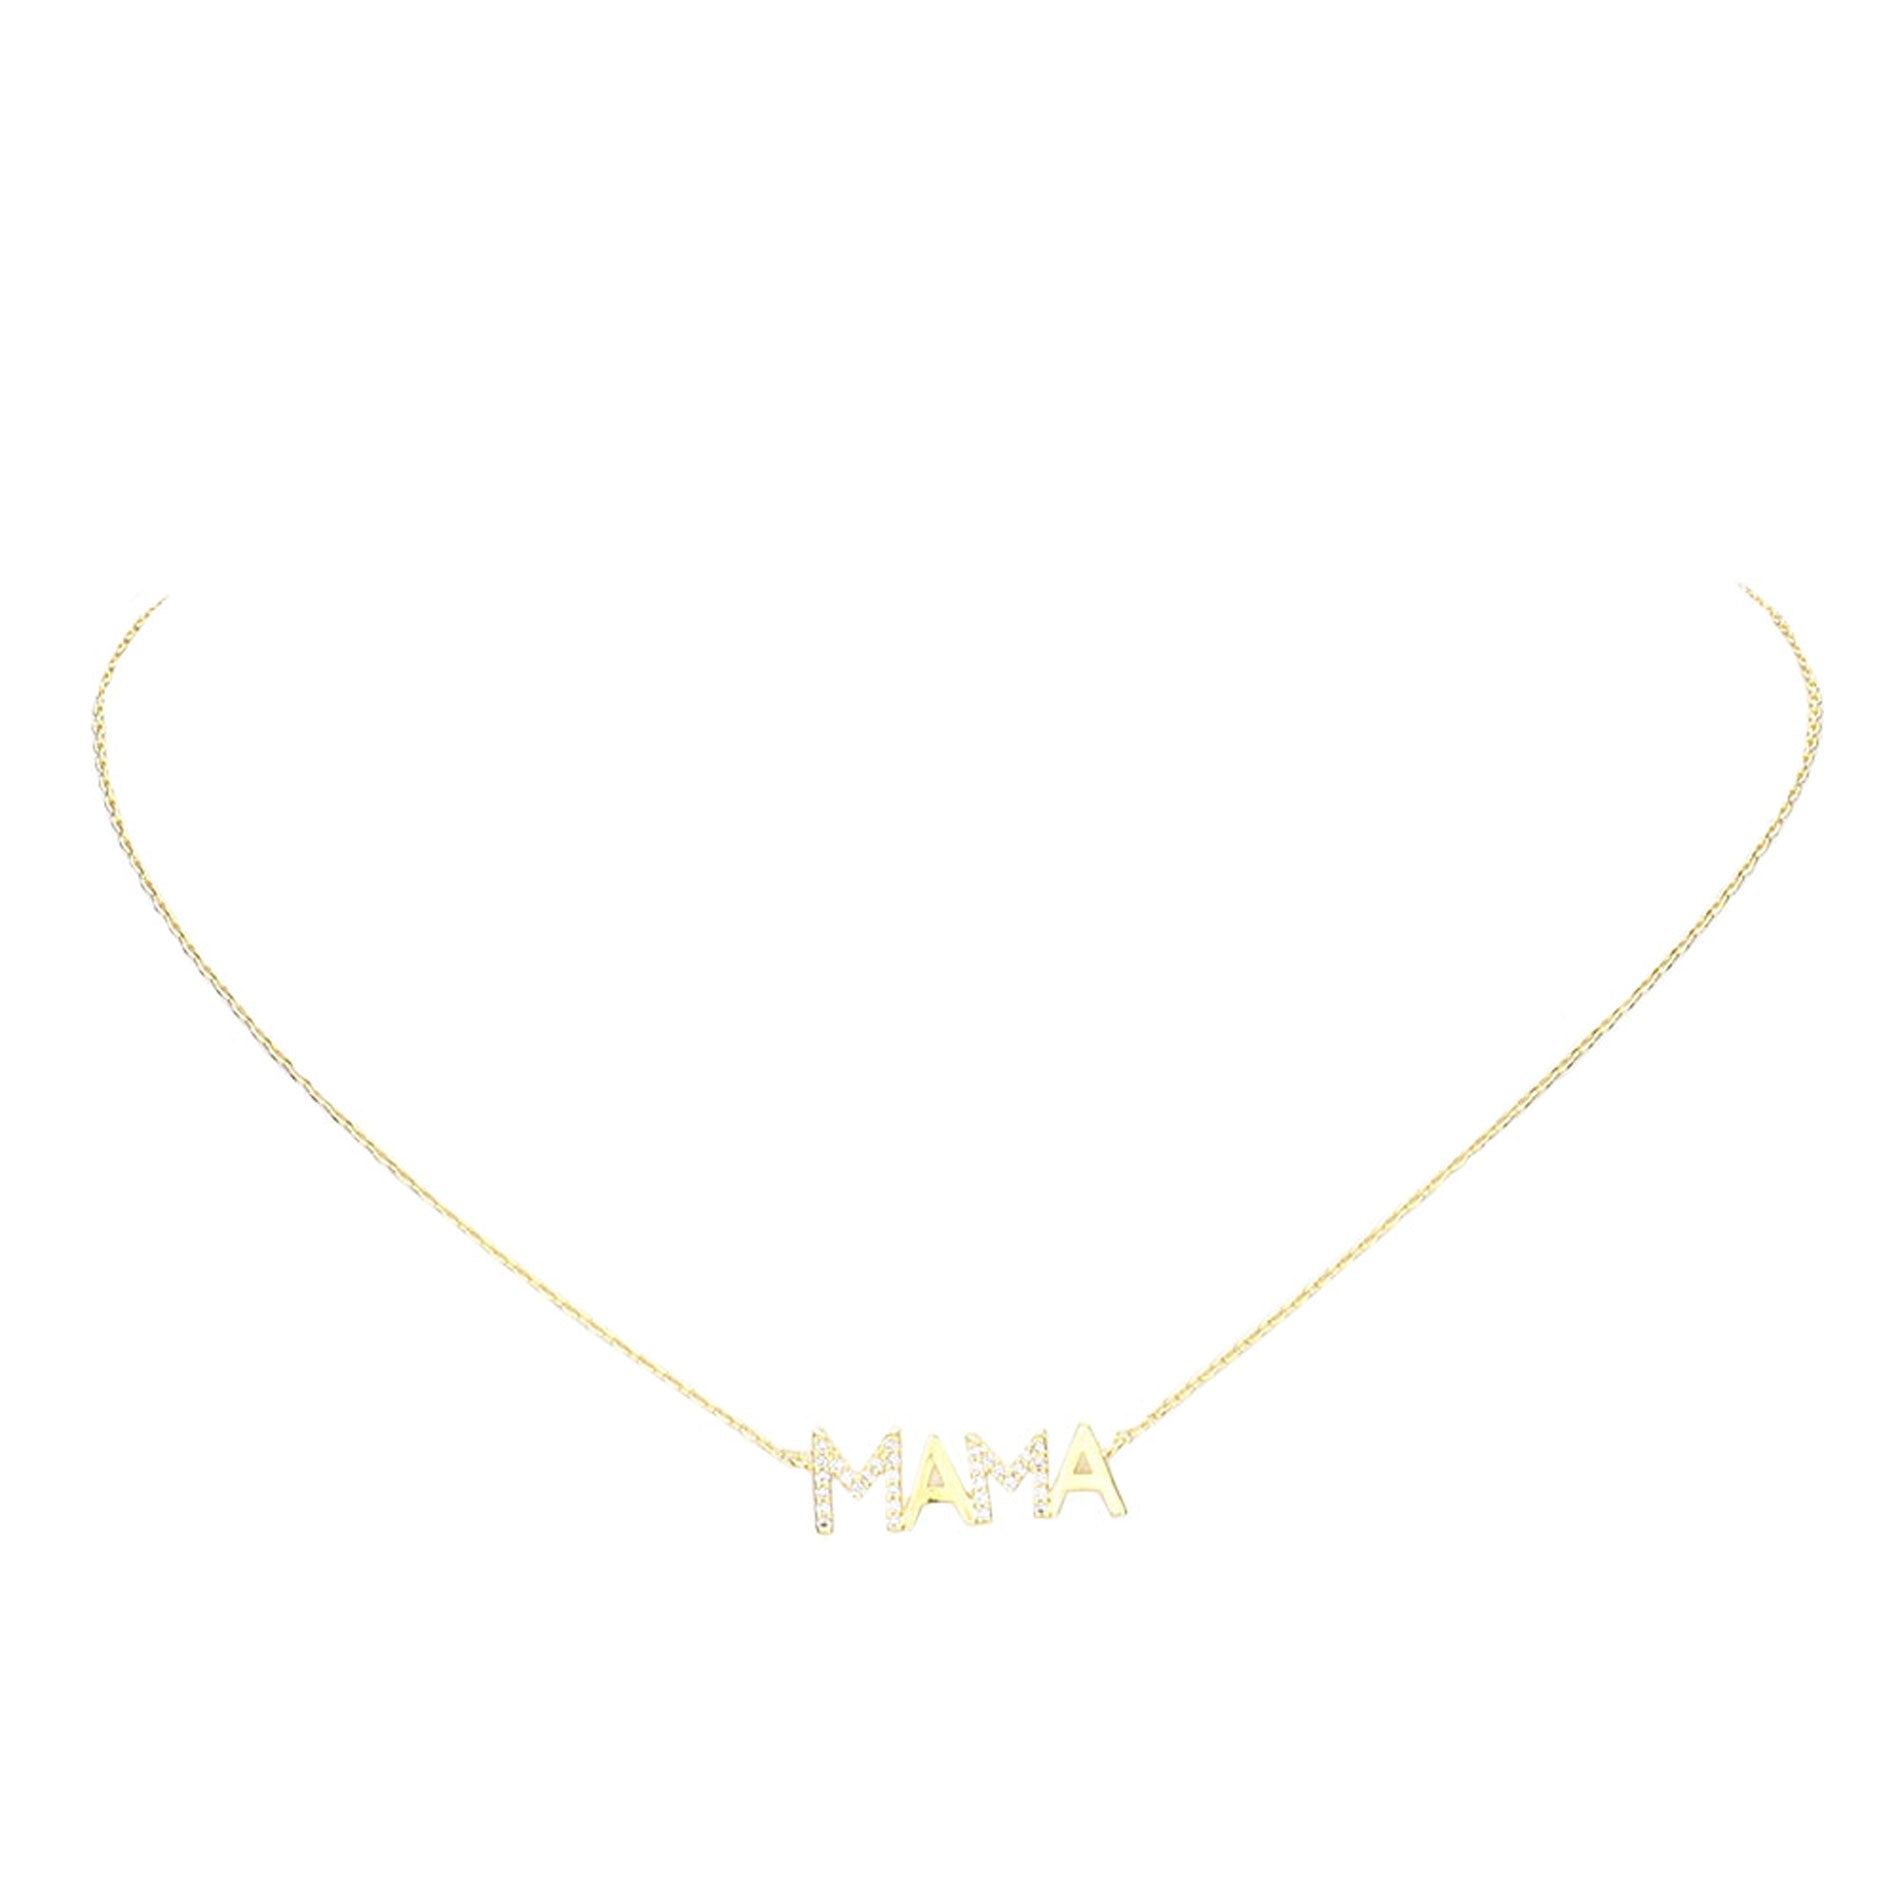 Gold White Gold Dipped CZ Mama Metal Message Pendant Necklace, Get ready with these Necklace, put on a pop of color to complete your ensemble. This necklace makes your mom feel special ! Perfect for adding just the right amount of shimmer & shine and a touch of class to special events. This Mama's necklace is perfect Mother's Day gift for all the special women in your life, be it mother, wife, sister or daughter.